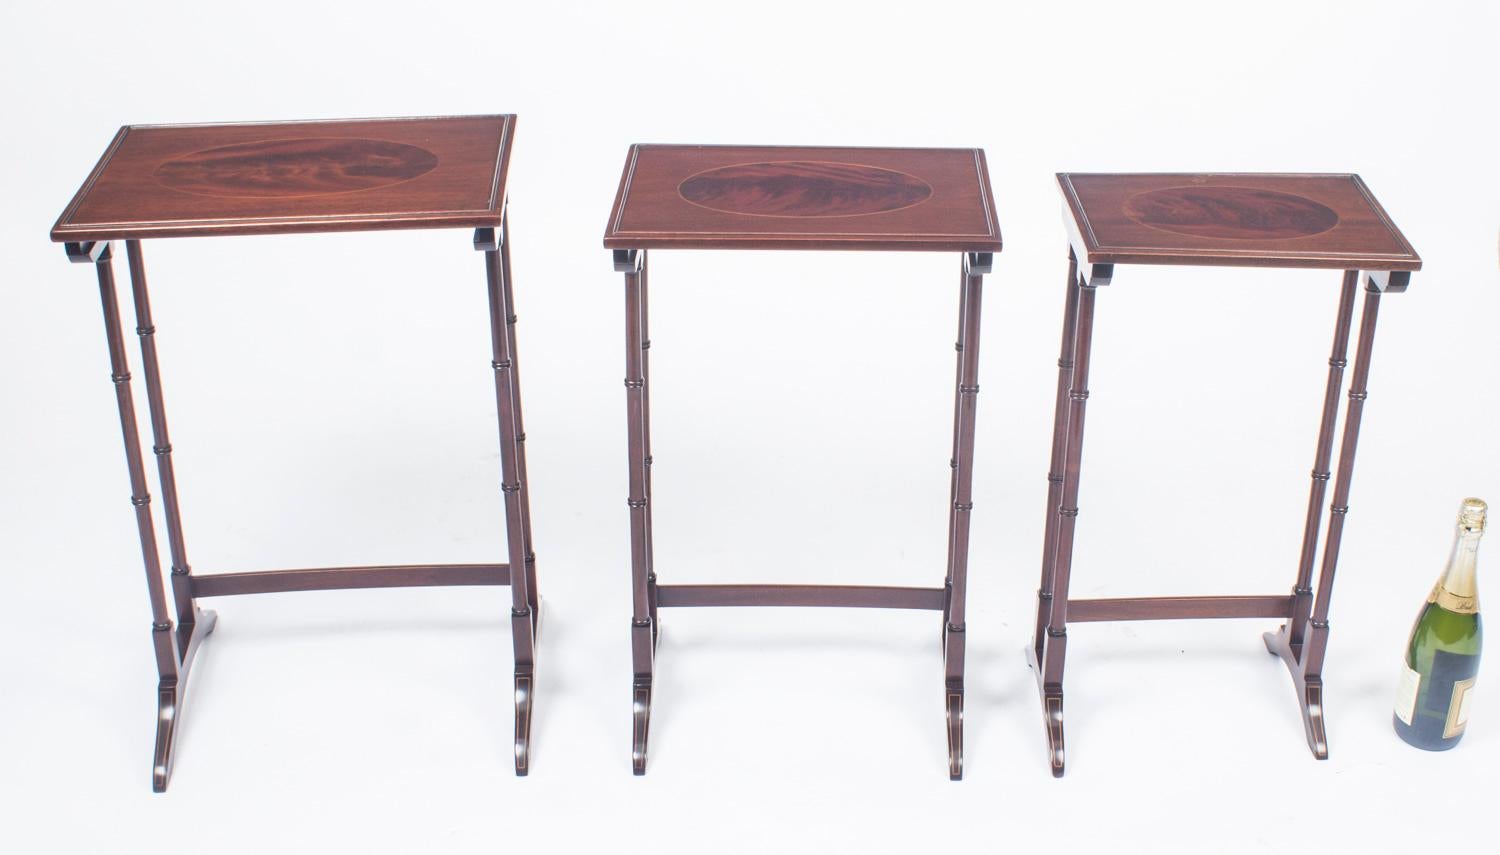 Antique Victorian Mahogany & Inlaid Nest of 3 Tables c.1880 For Sale 2